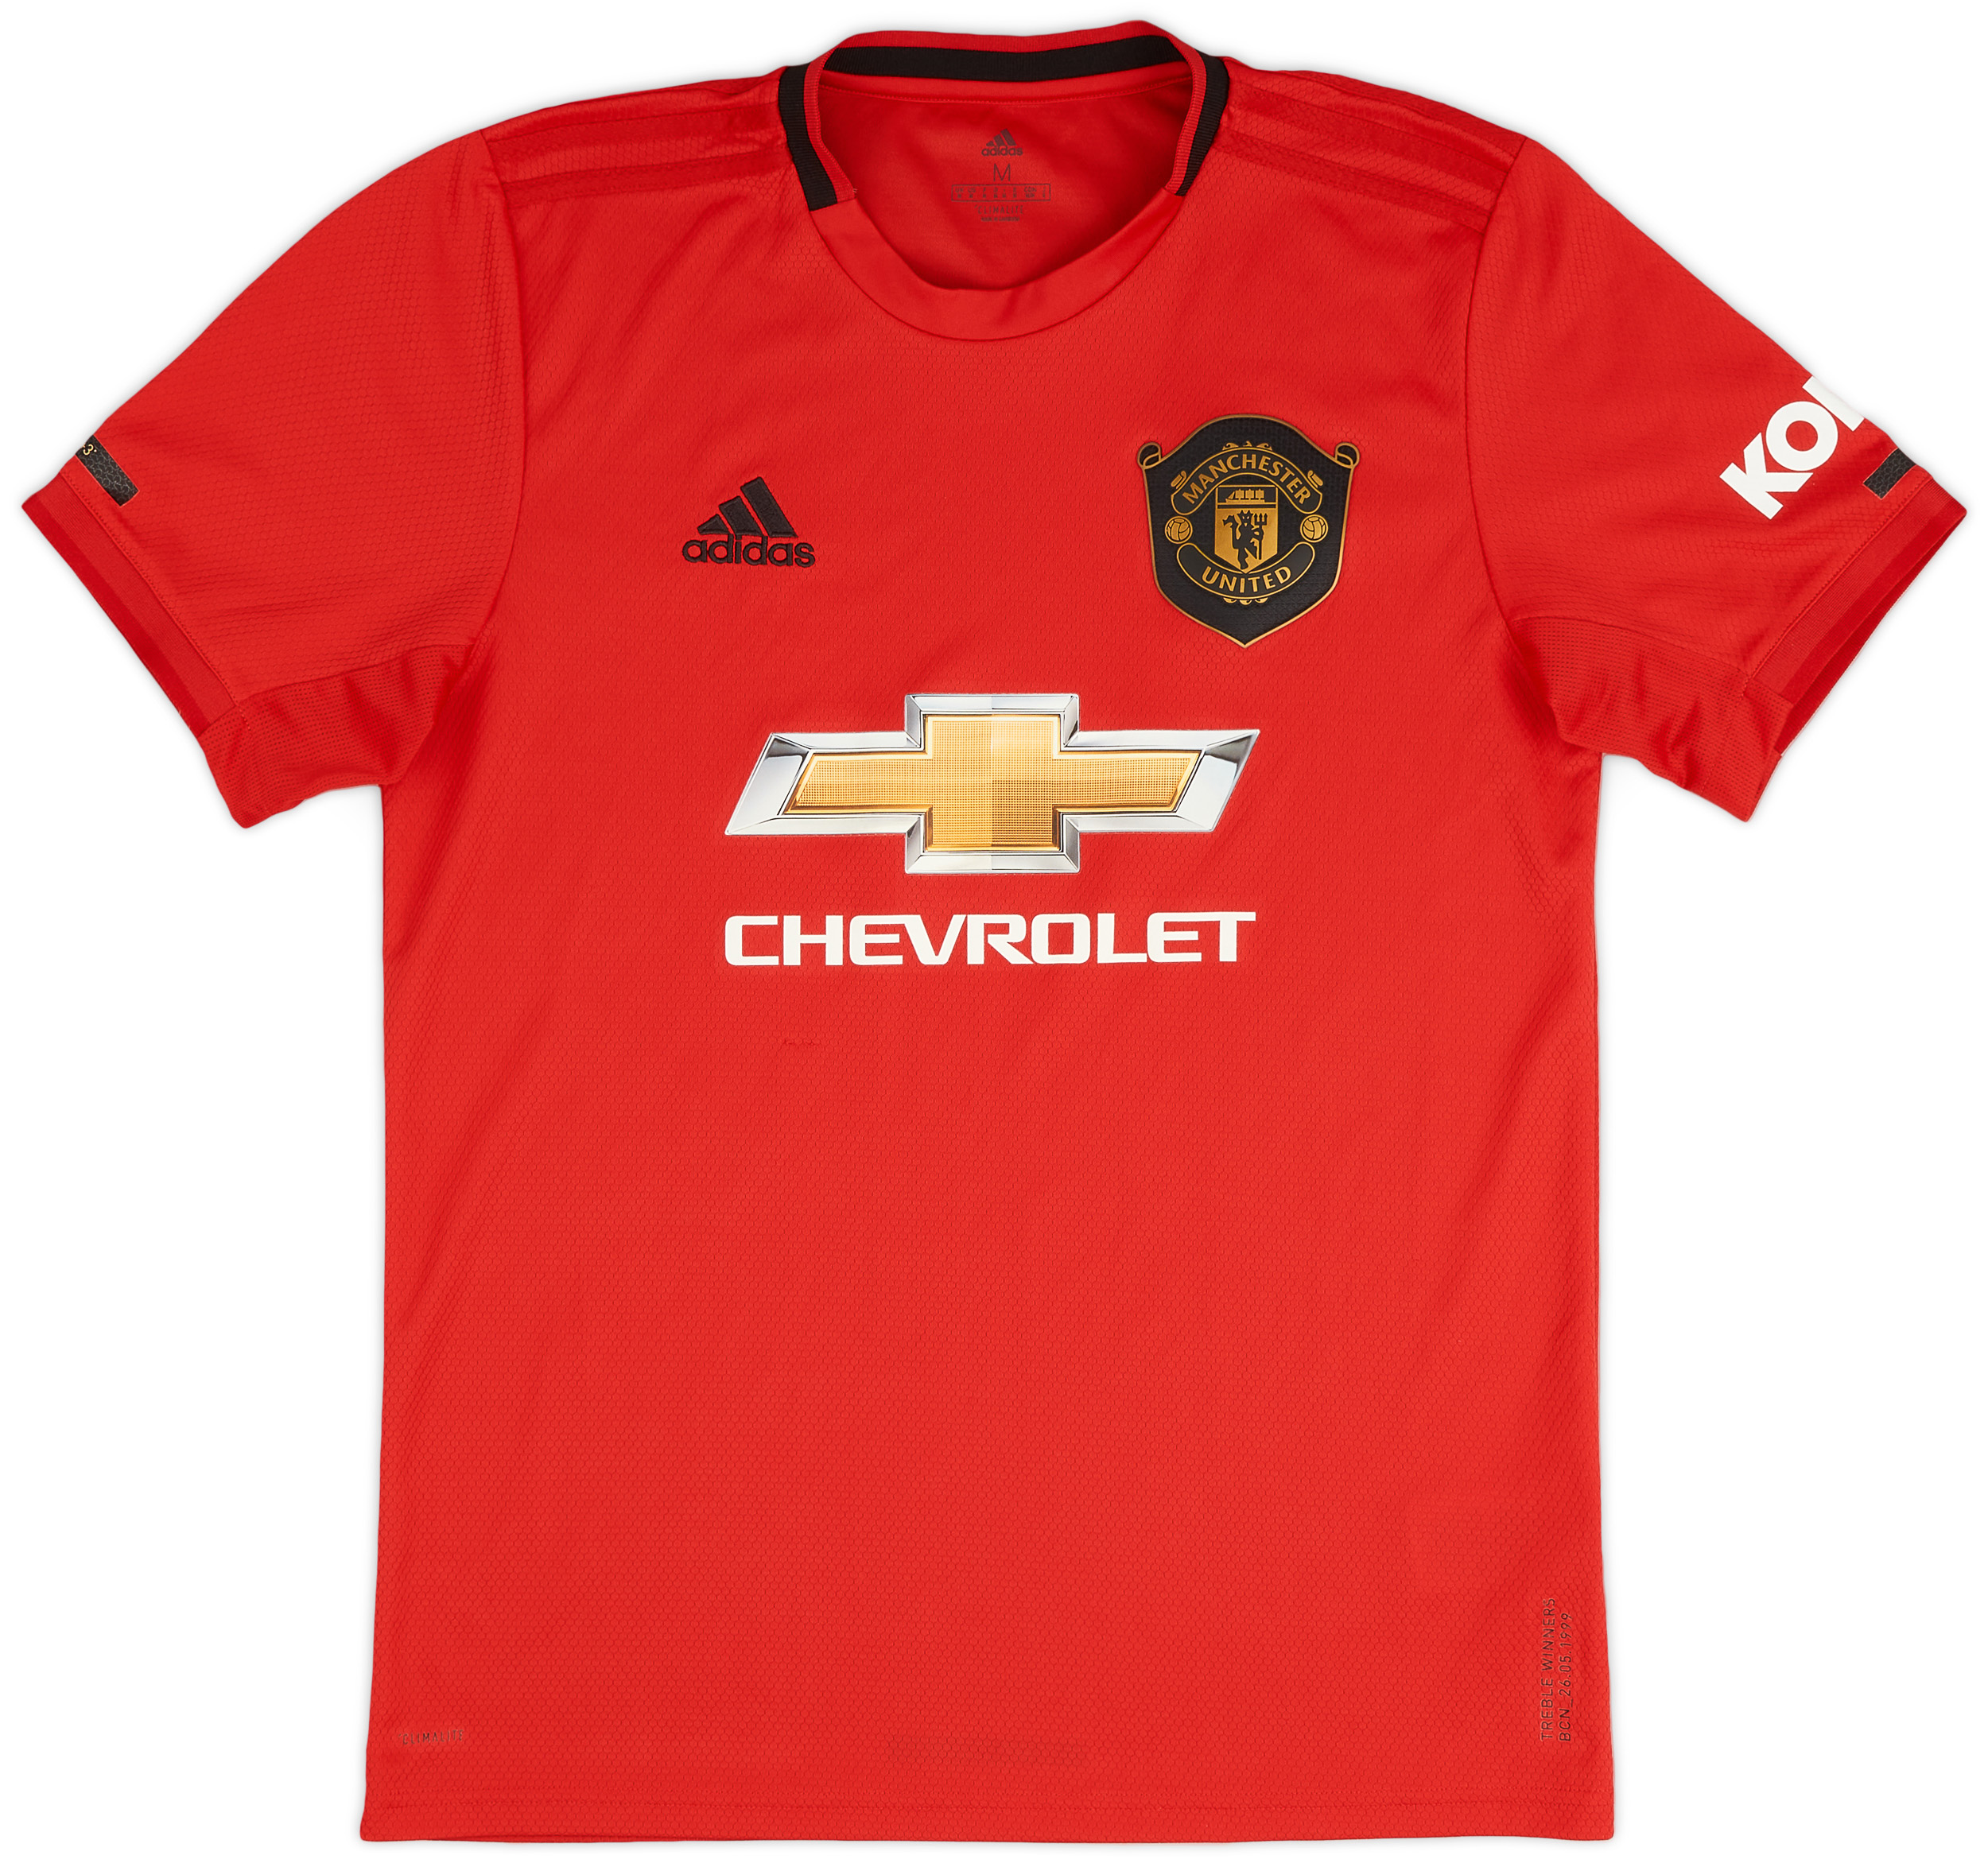 2019-20 Manchester United Home Shirt - 8/10 - ()